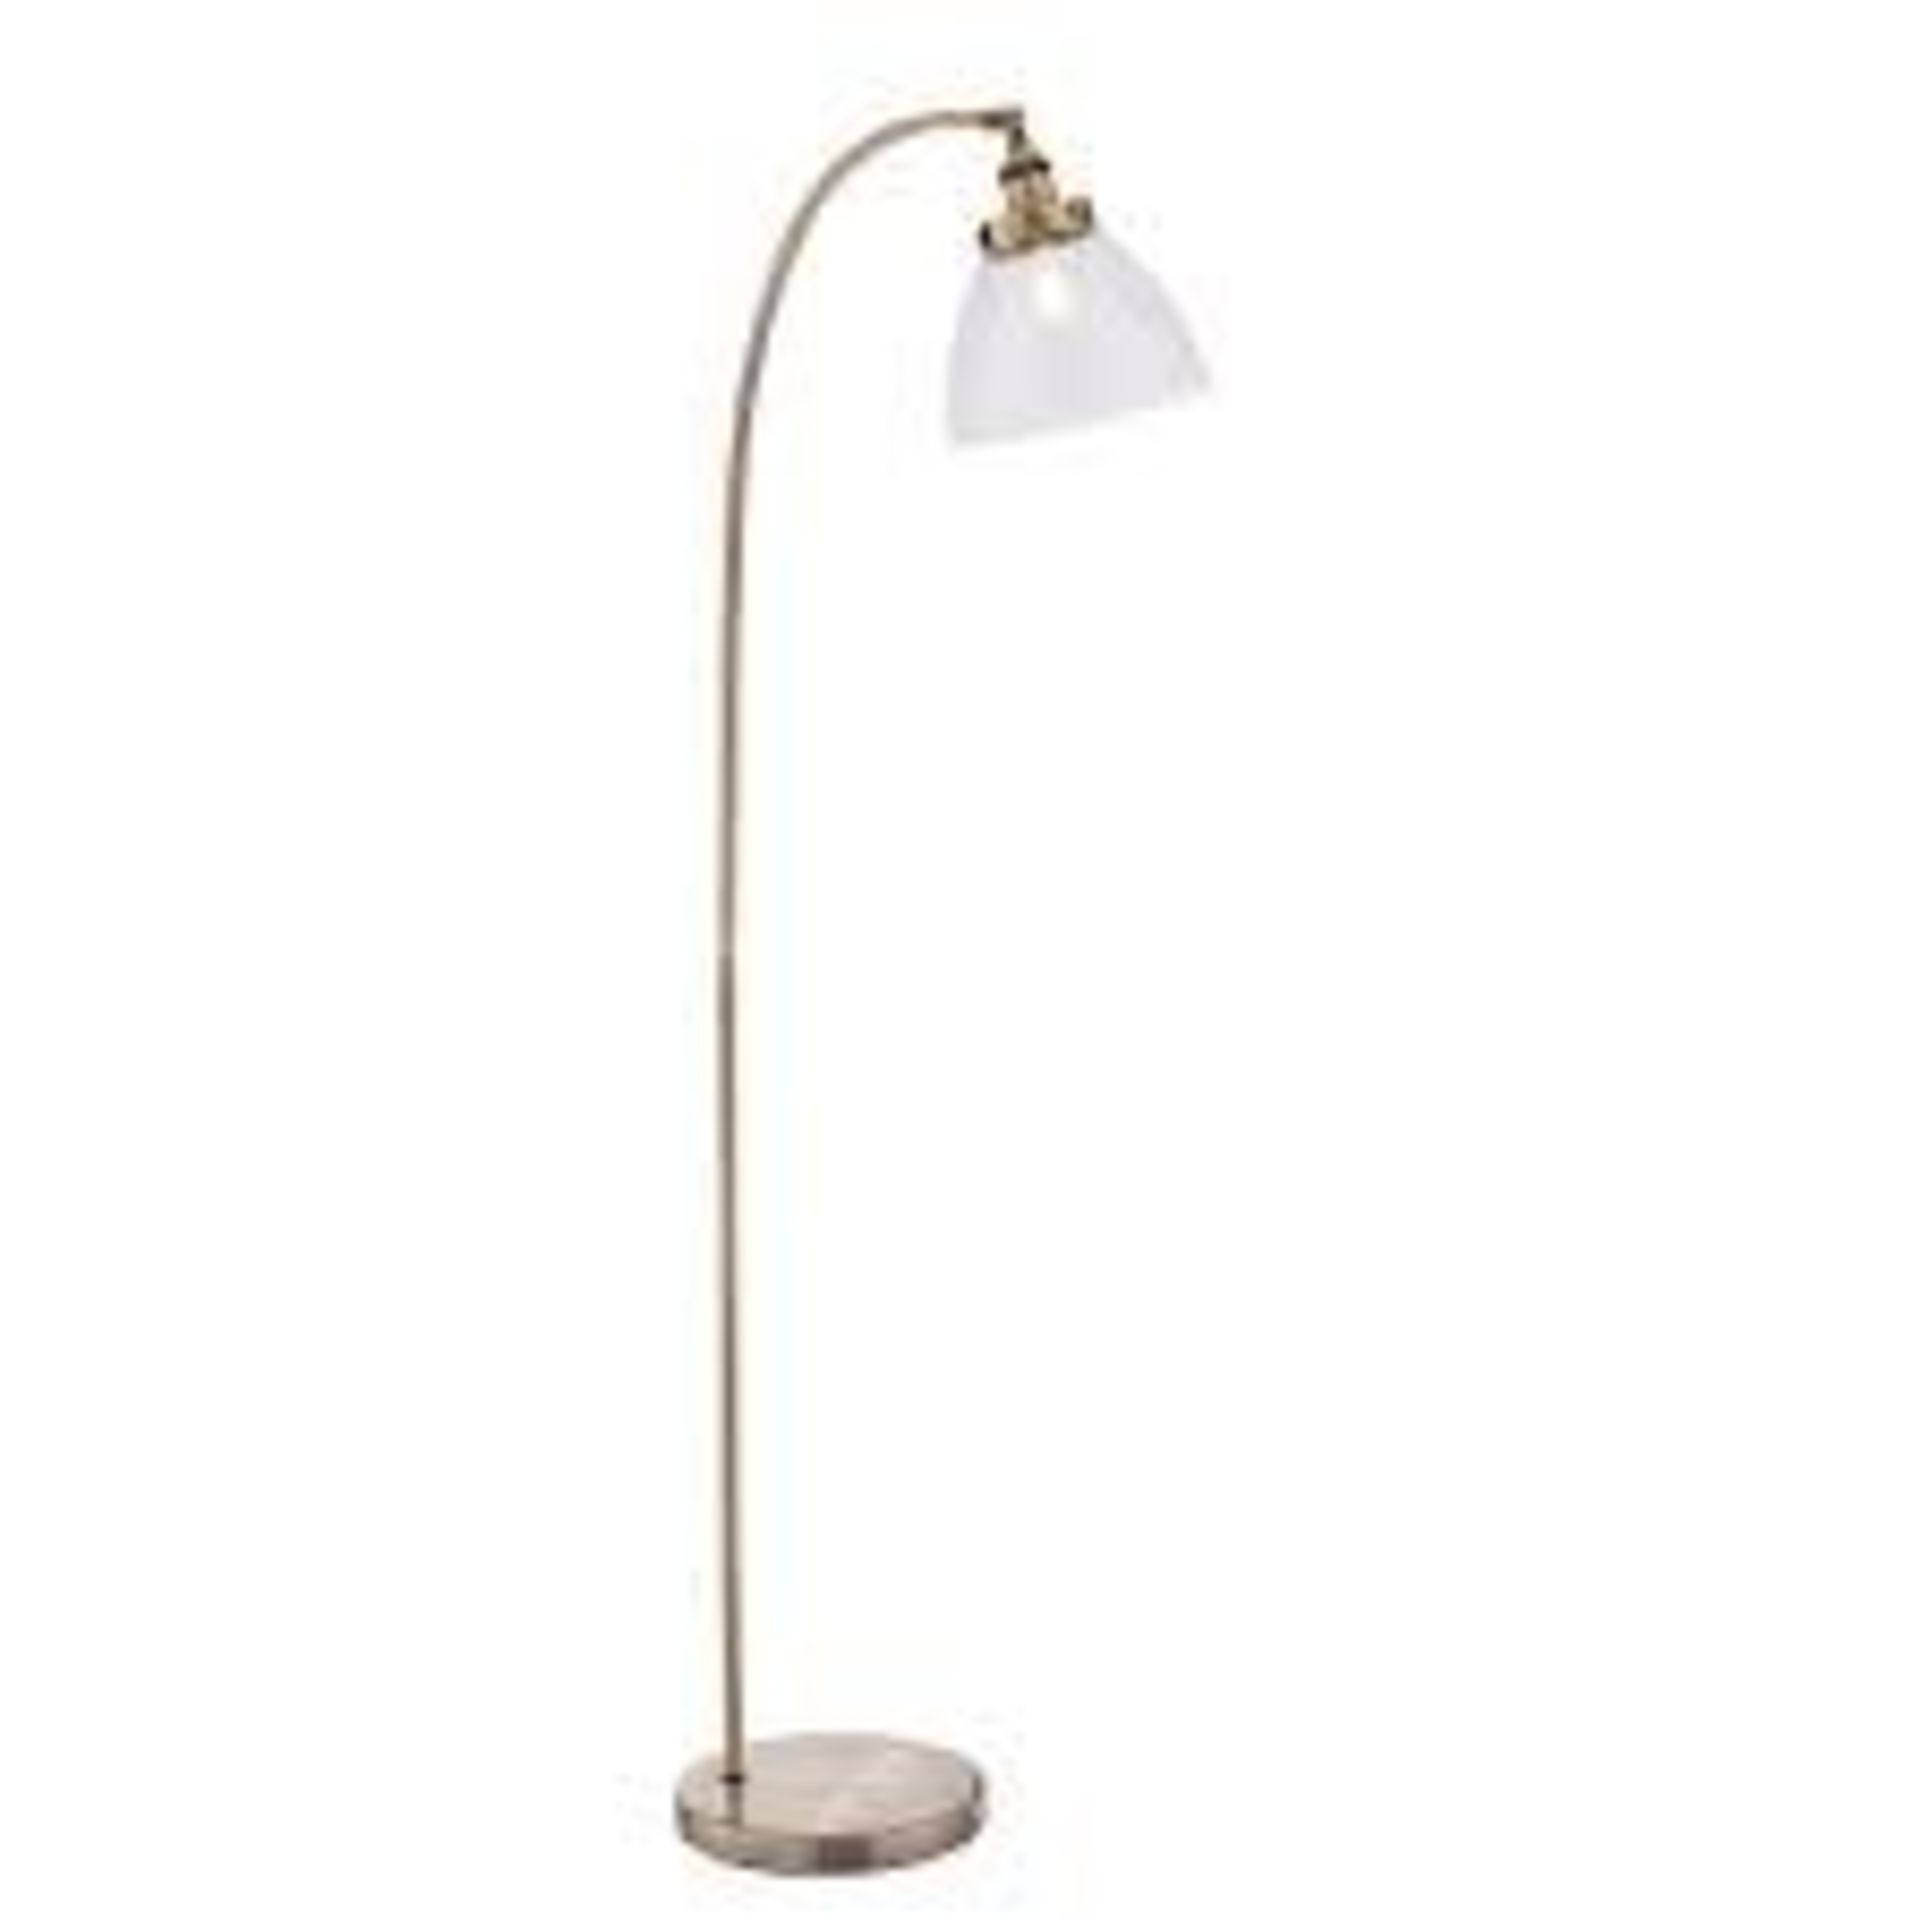 Antique Brass Floor Standing Curved Designer Reading Lamp RRP £80 (Public Viewing and Appraisals